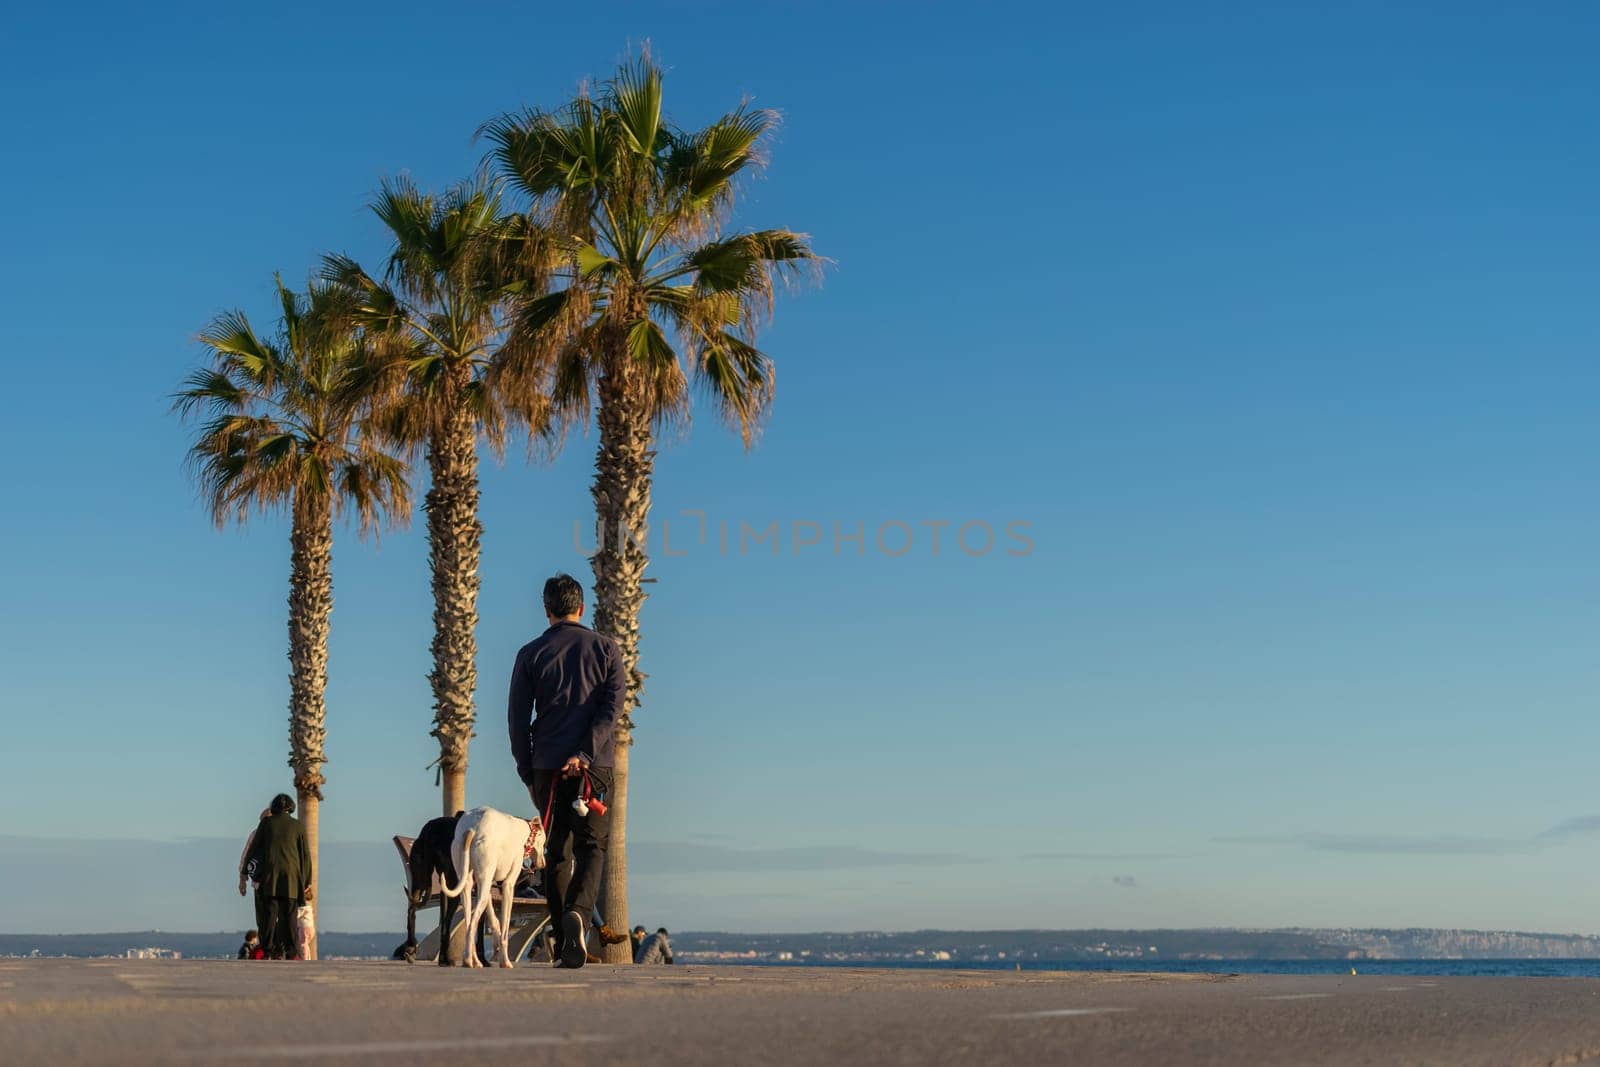 A peaceful walk along the seaside promenade is captured, featuring tall palm trees and individuals with their dogs, enjoying the vast blue sky and the tranquility of a clear day.